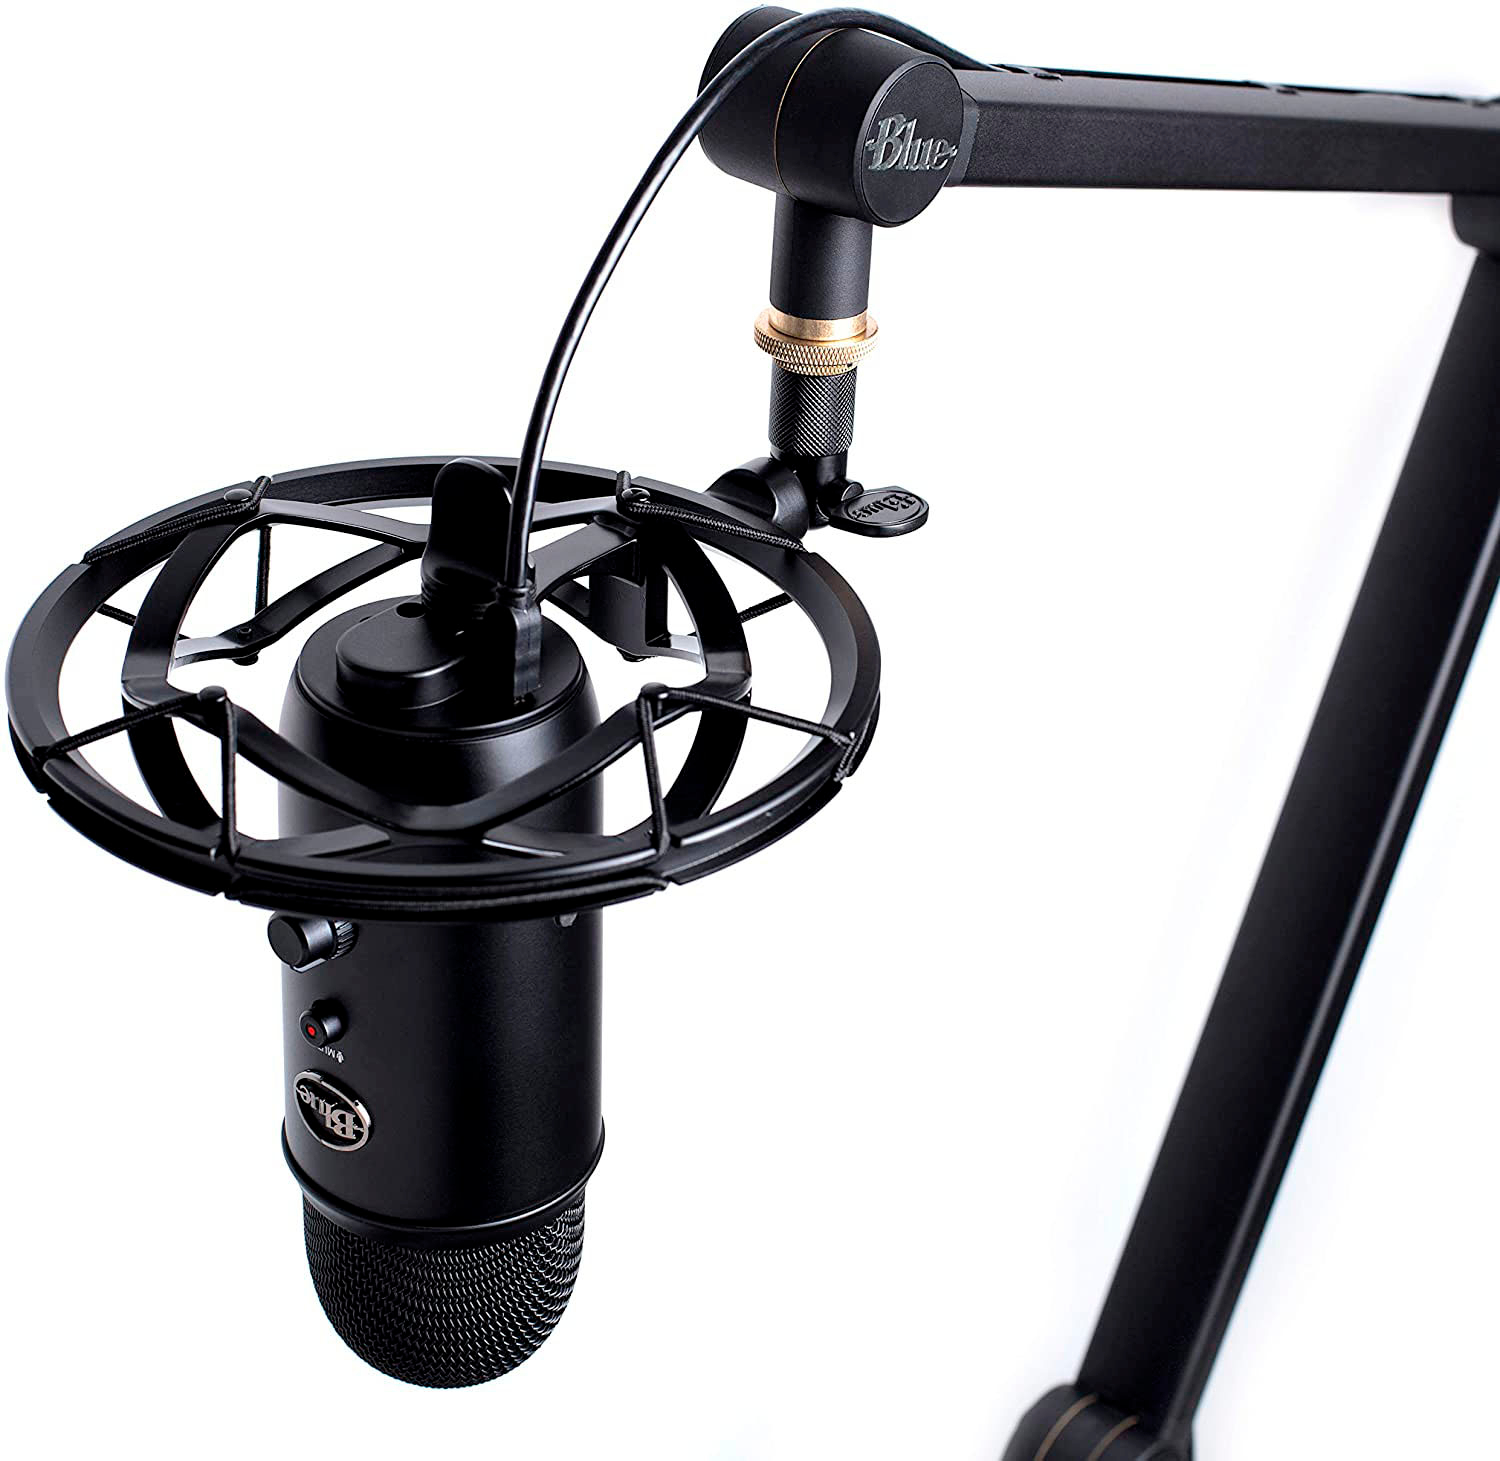  Logitech For Creators Blue Compass Premium Tube-Style  Microphone Broadcast Boom Arm with Internal Springs, Desktop Clamp &  Built-in Cable Management for Recording, Gaming, Streaming - Black : Sports  & Outdoors